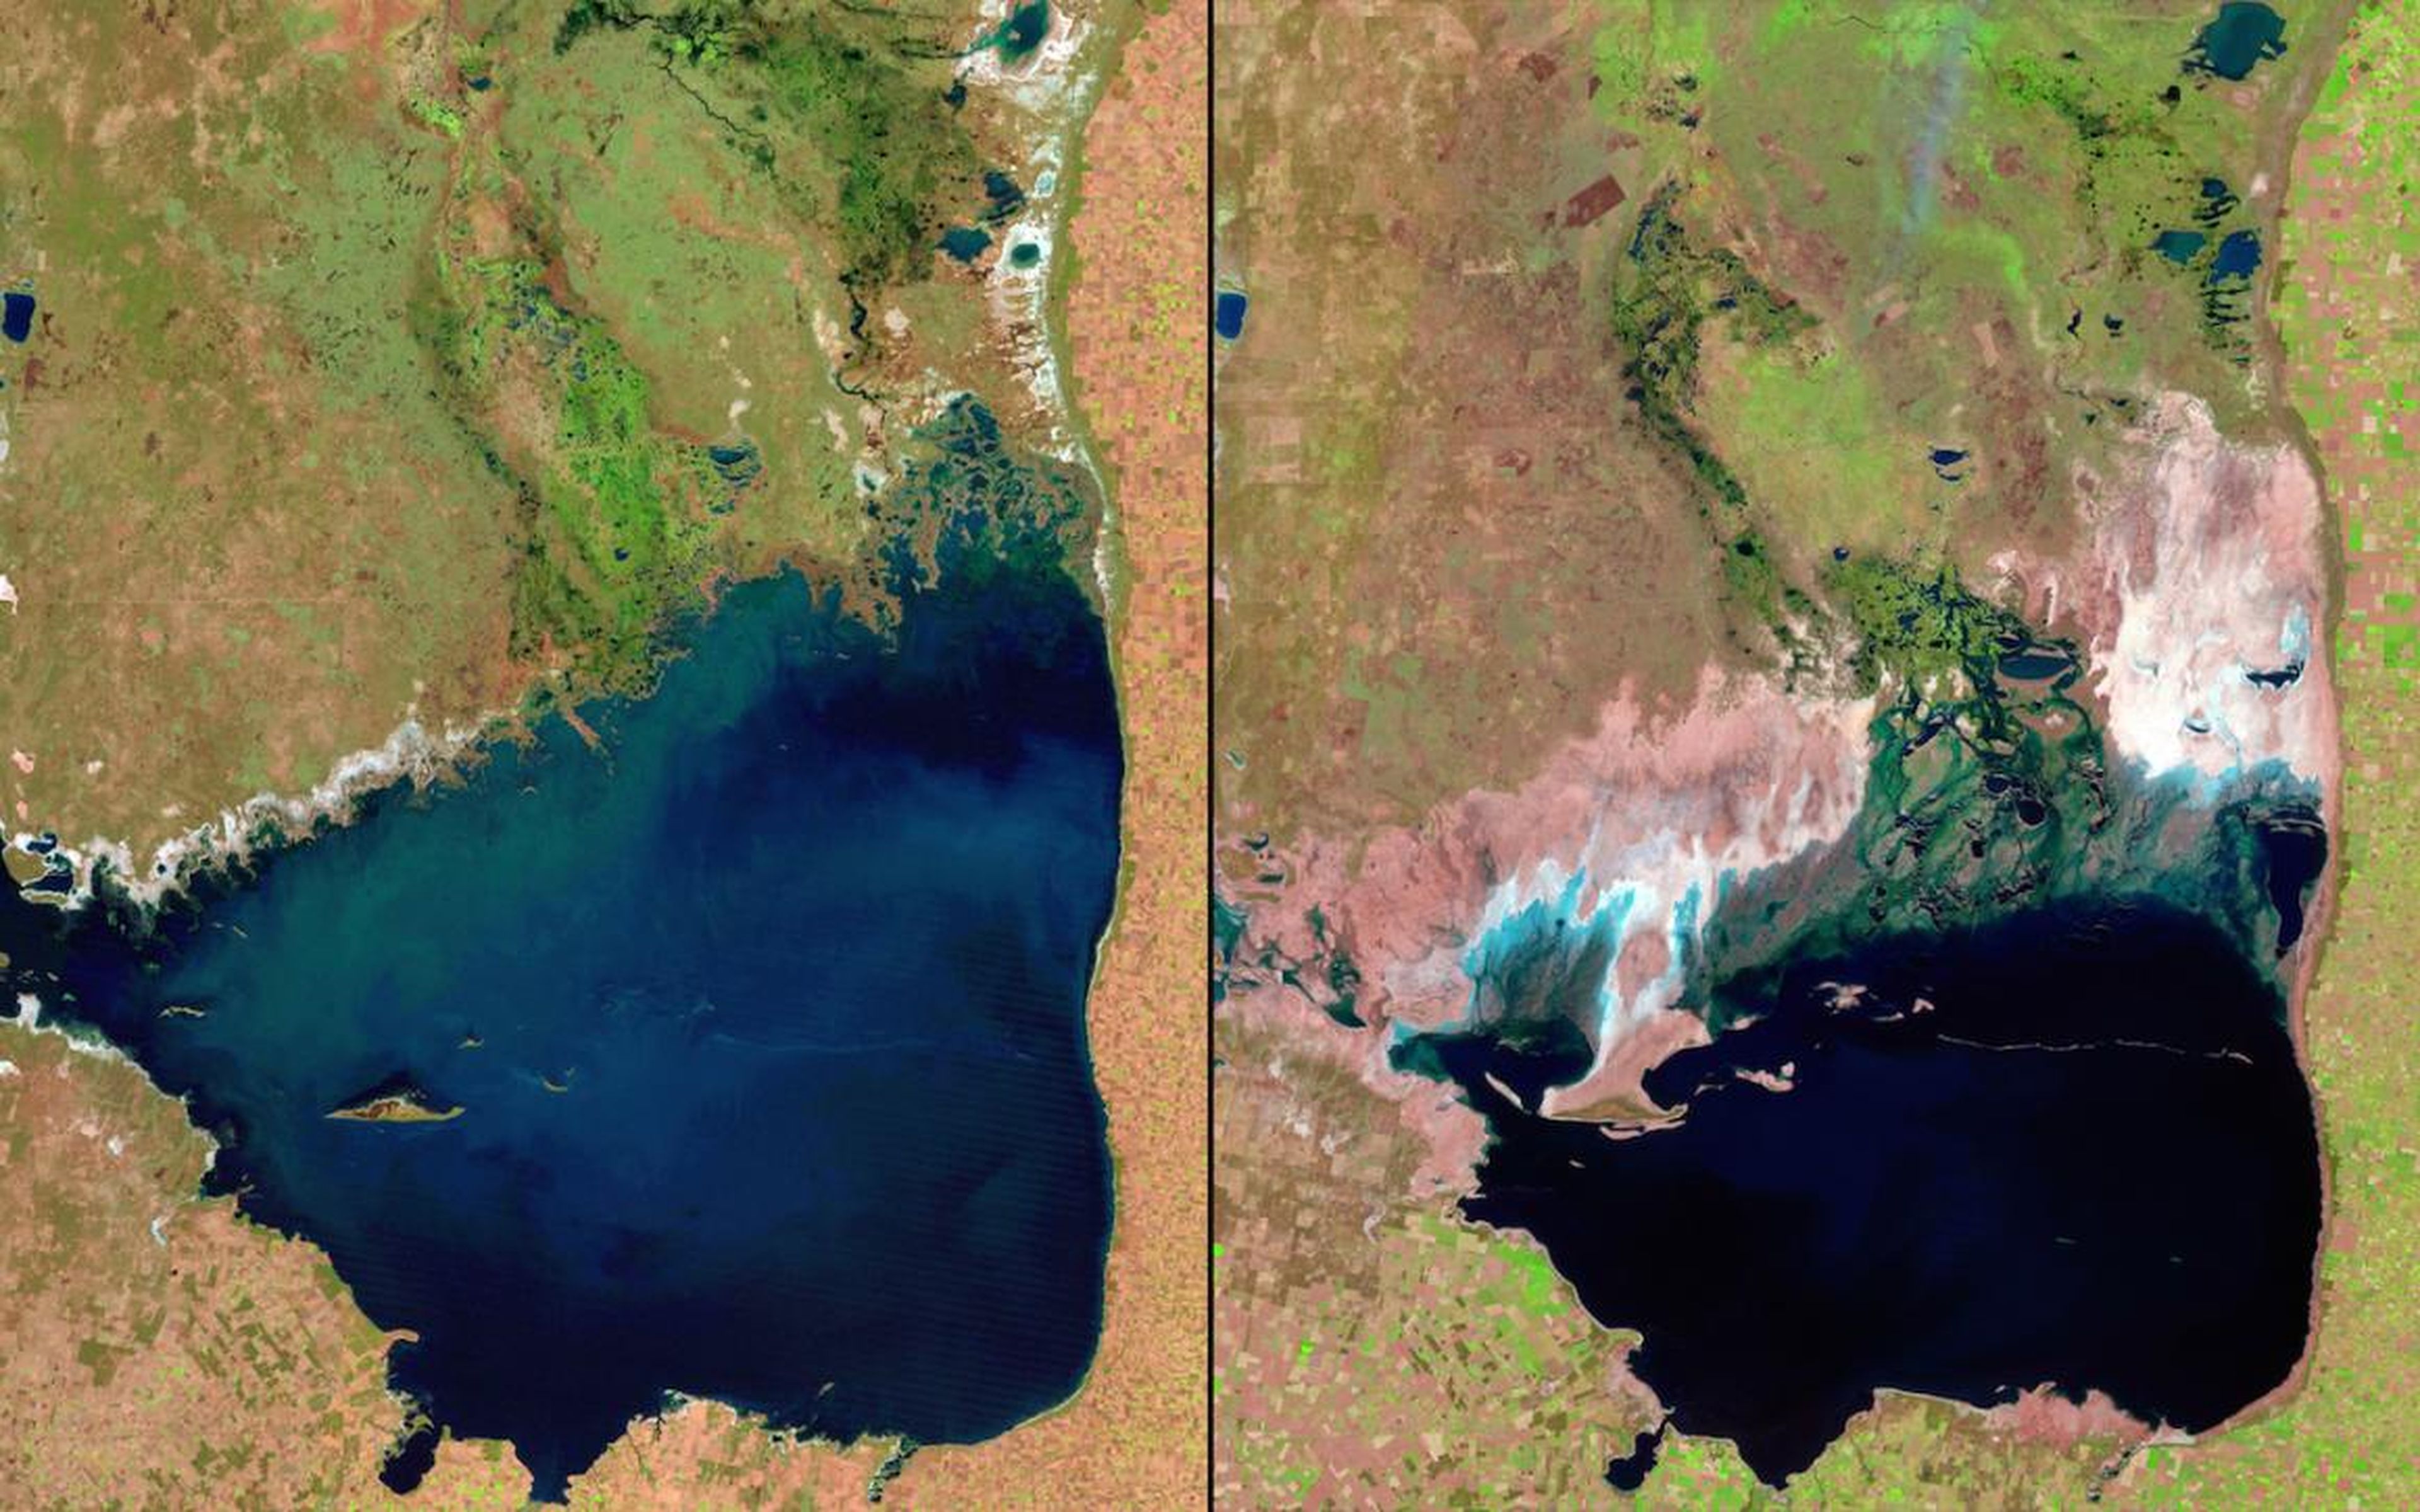 Argentina's Mar Chiquita Lake has also gotten significantly smaller. The image on the left is from 1998, and the lake is shown in 2011 on the right.